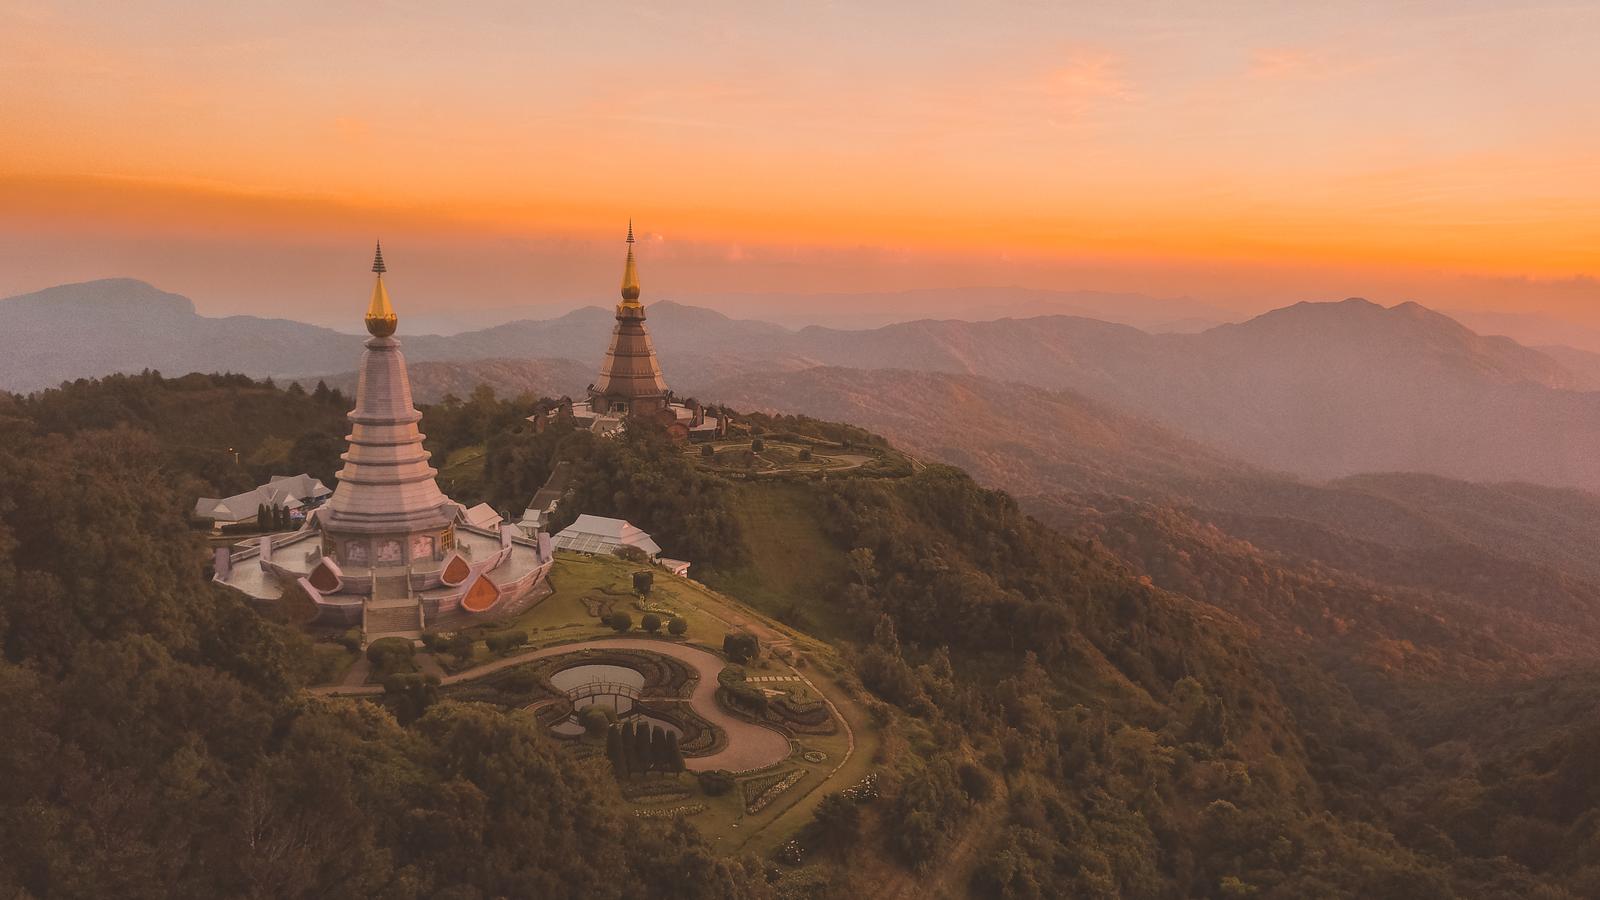 This City-Country Matching Quiz Gets Progressively Harder With Each Question – Can You Keep up With It? Chiang Mai, Thailand